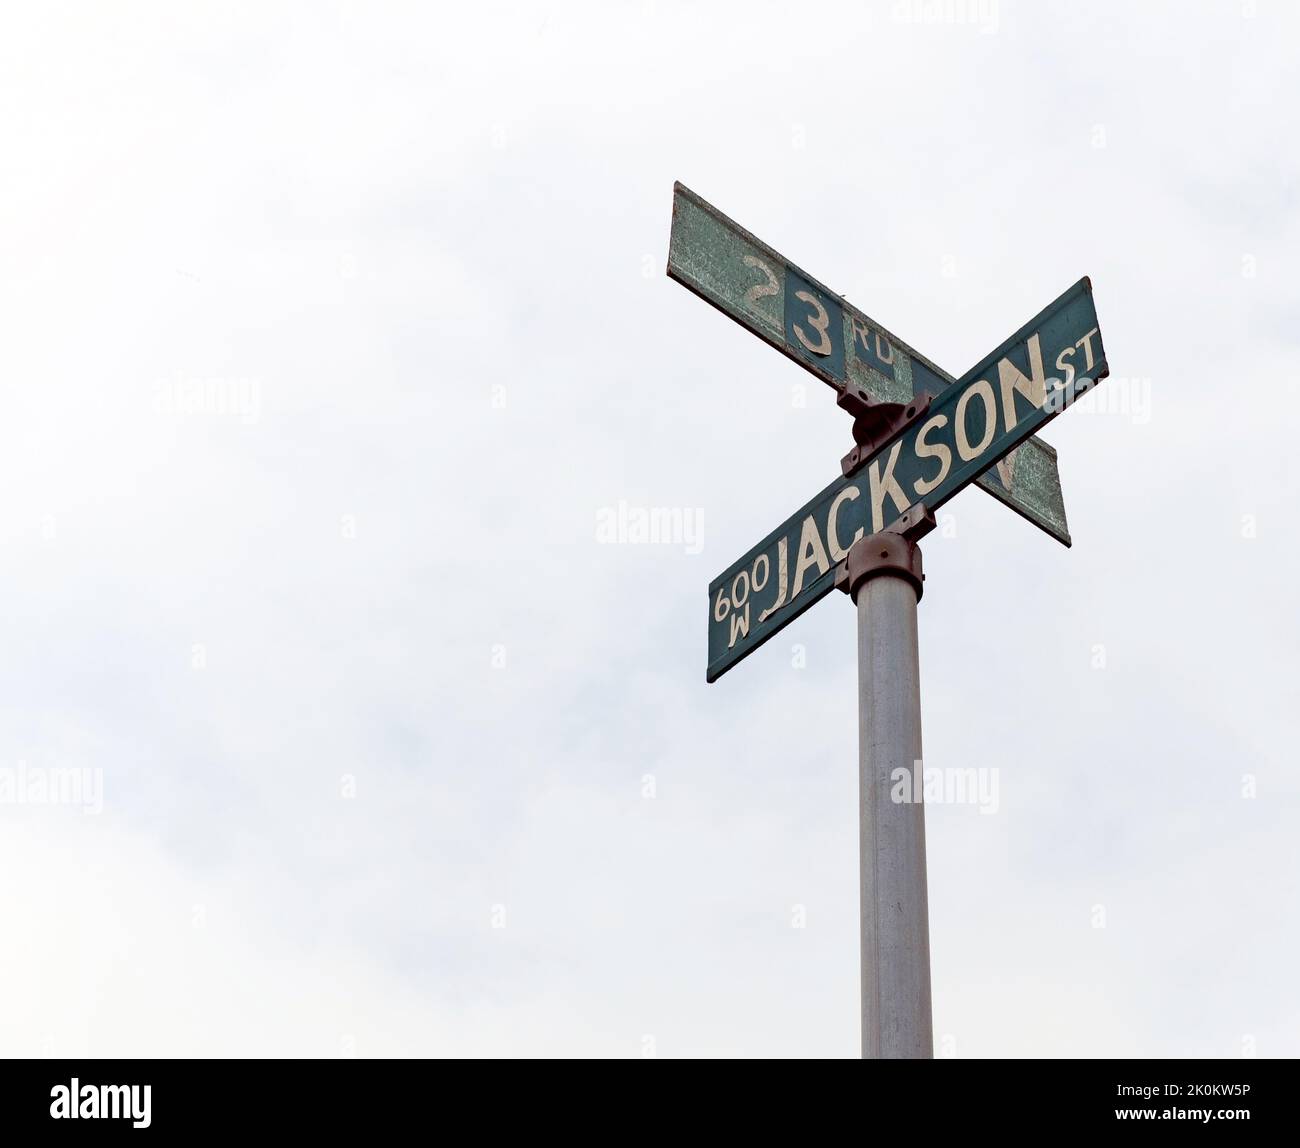 The cross street signs of Jackson and 23rd in Gary, Indiana, USA.  Jackson Street is named after the Jackson family that lived here. Stock Photo